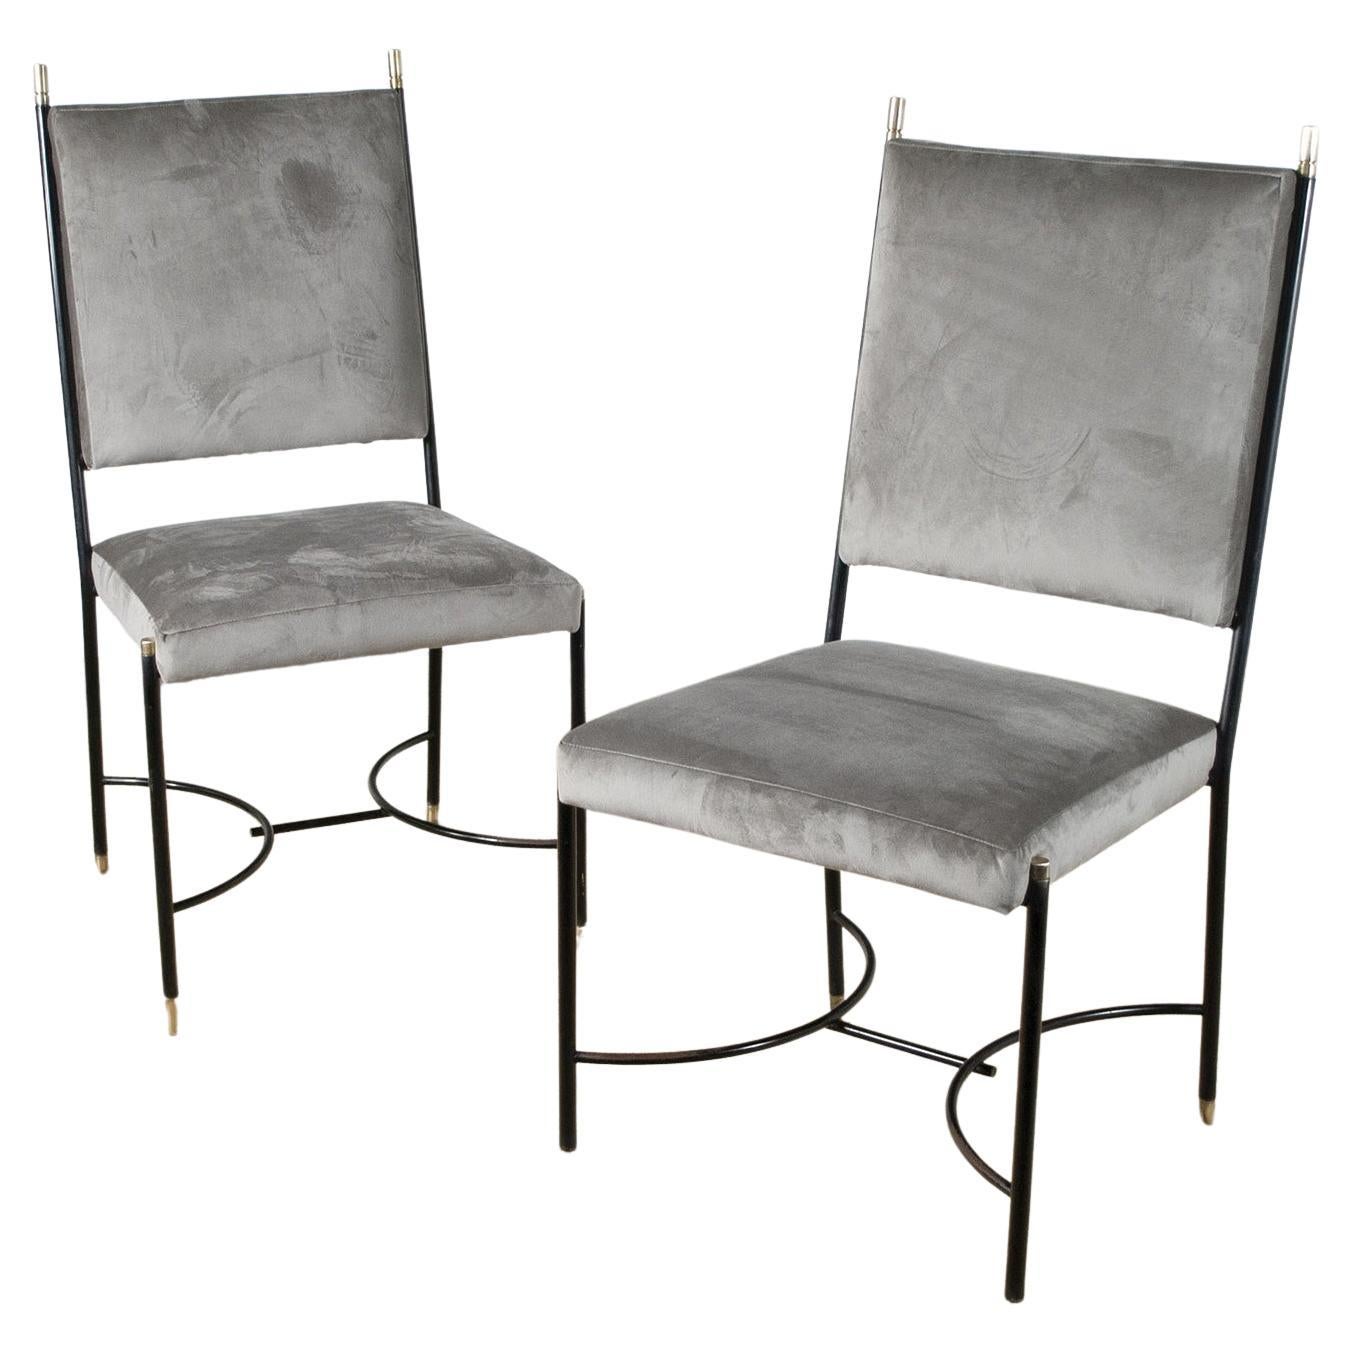 Set of two Regency-style chairs by Luigi Caccia Dominioni iron frame with brass ferrules in gray velvet 1960s.